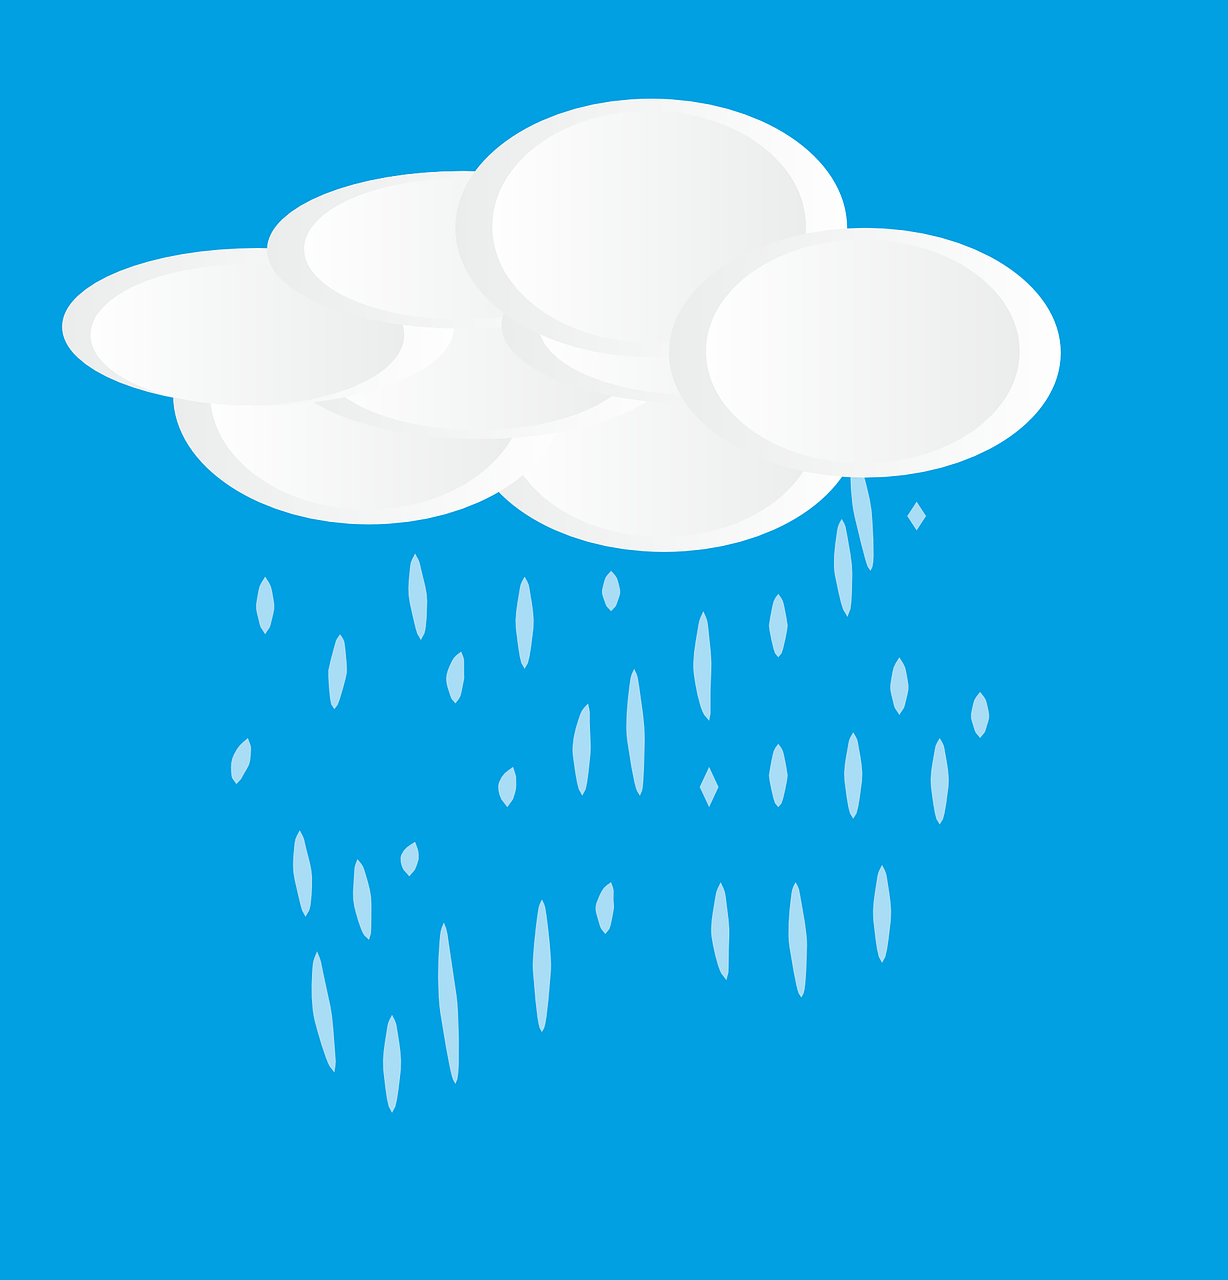 a cloud with rain coming out of it, an illustration of, conceptual art, simple and clean illustration, with a blue background, illustration, drops